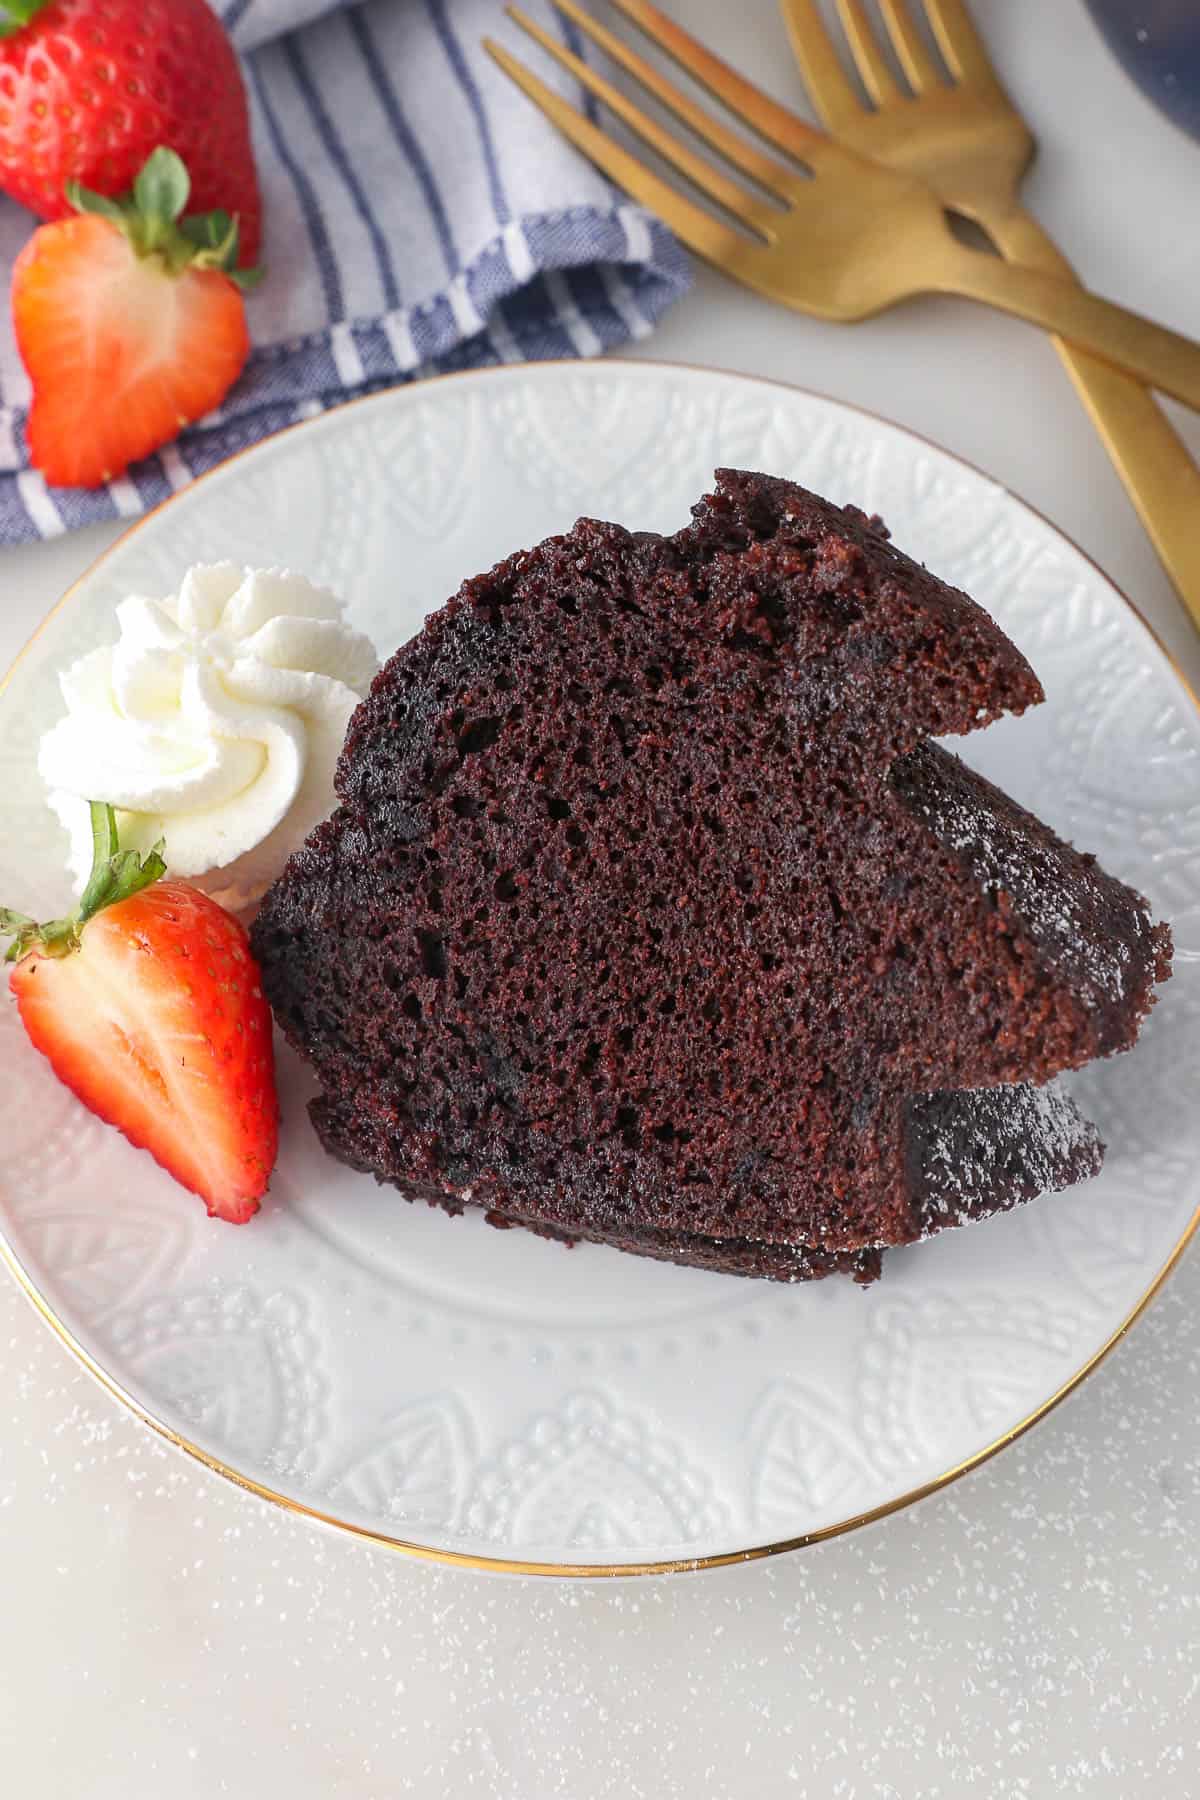 A slice of chocolate rum cake on a plate next to sliced strawberries and a swirl of whipped cream.